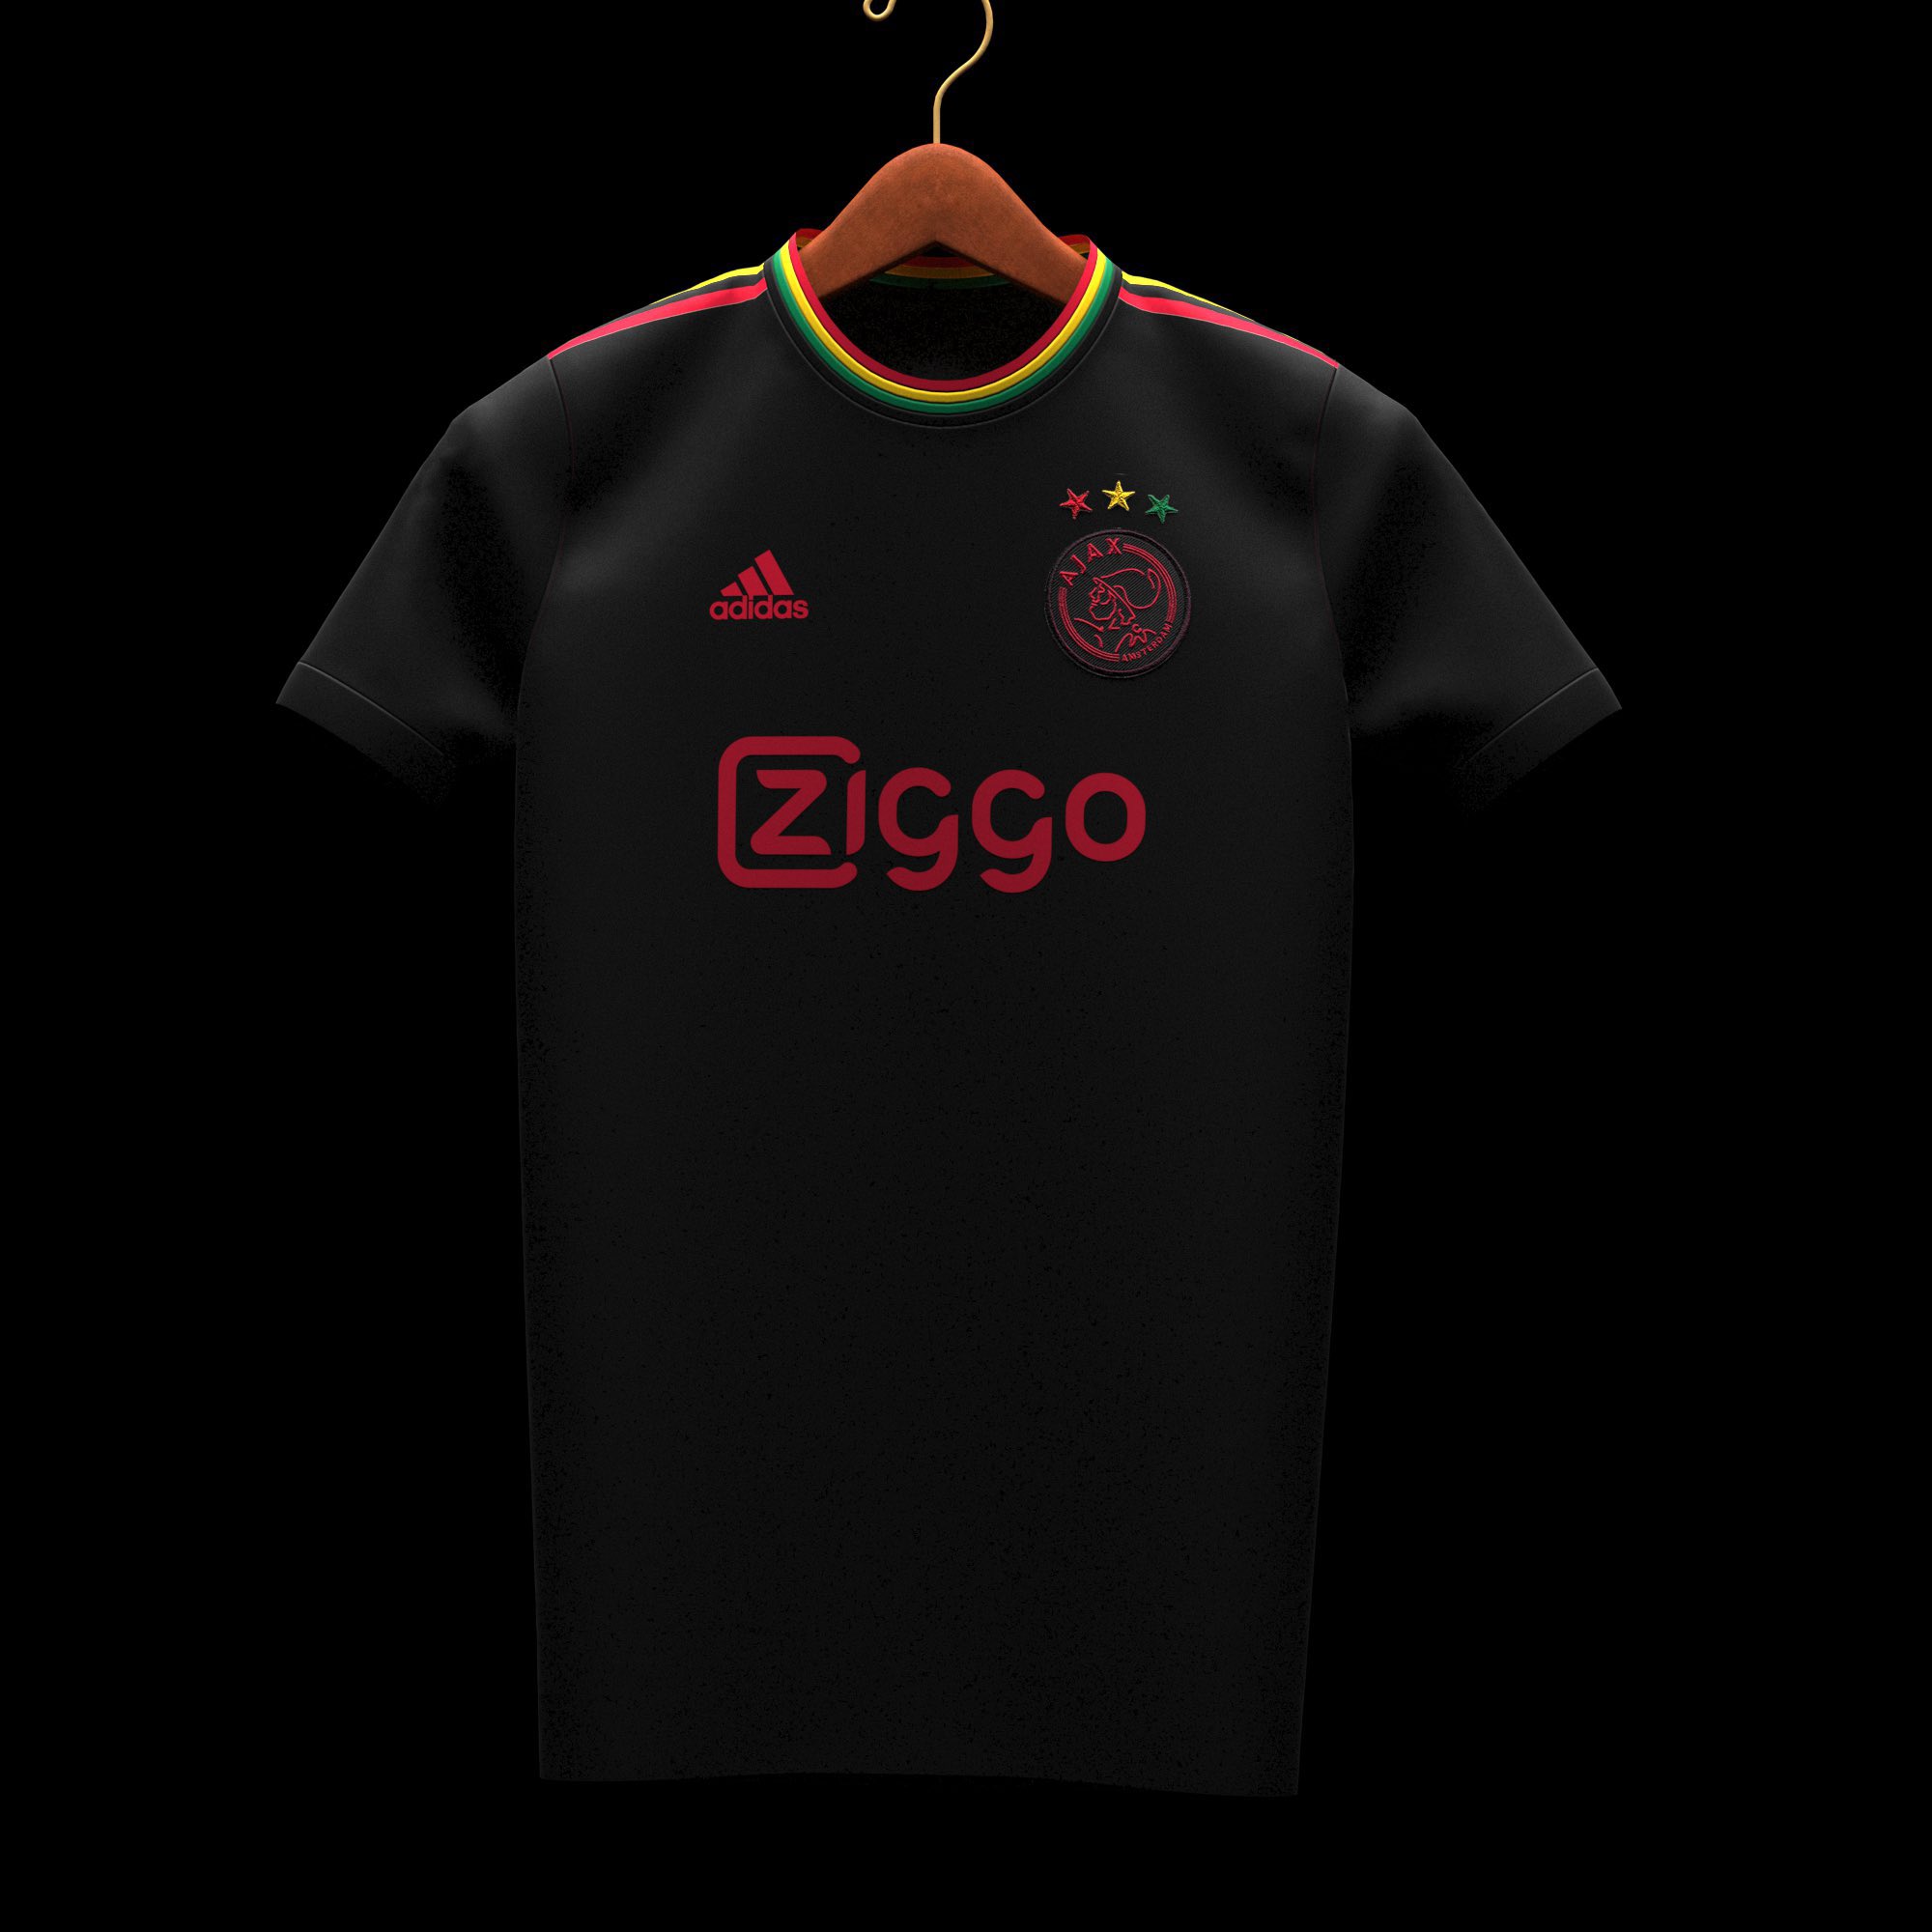 breuk barsten Bedelen Secret Shirt Co on Twitter: "According to reports, the Ajax 3rd kit for the  2021/22 season will be a Bob Marley inspired theme. The popular song "Three  Little Birds" has become an "